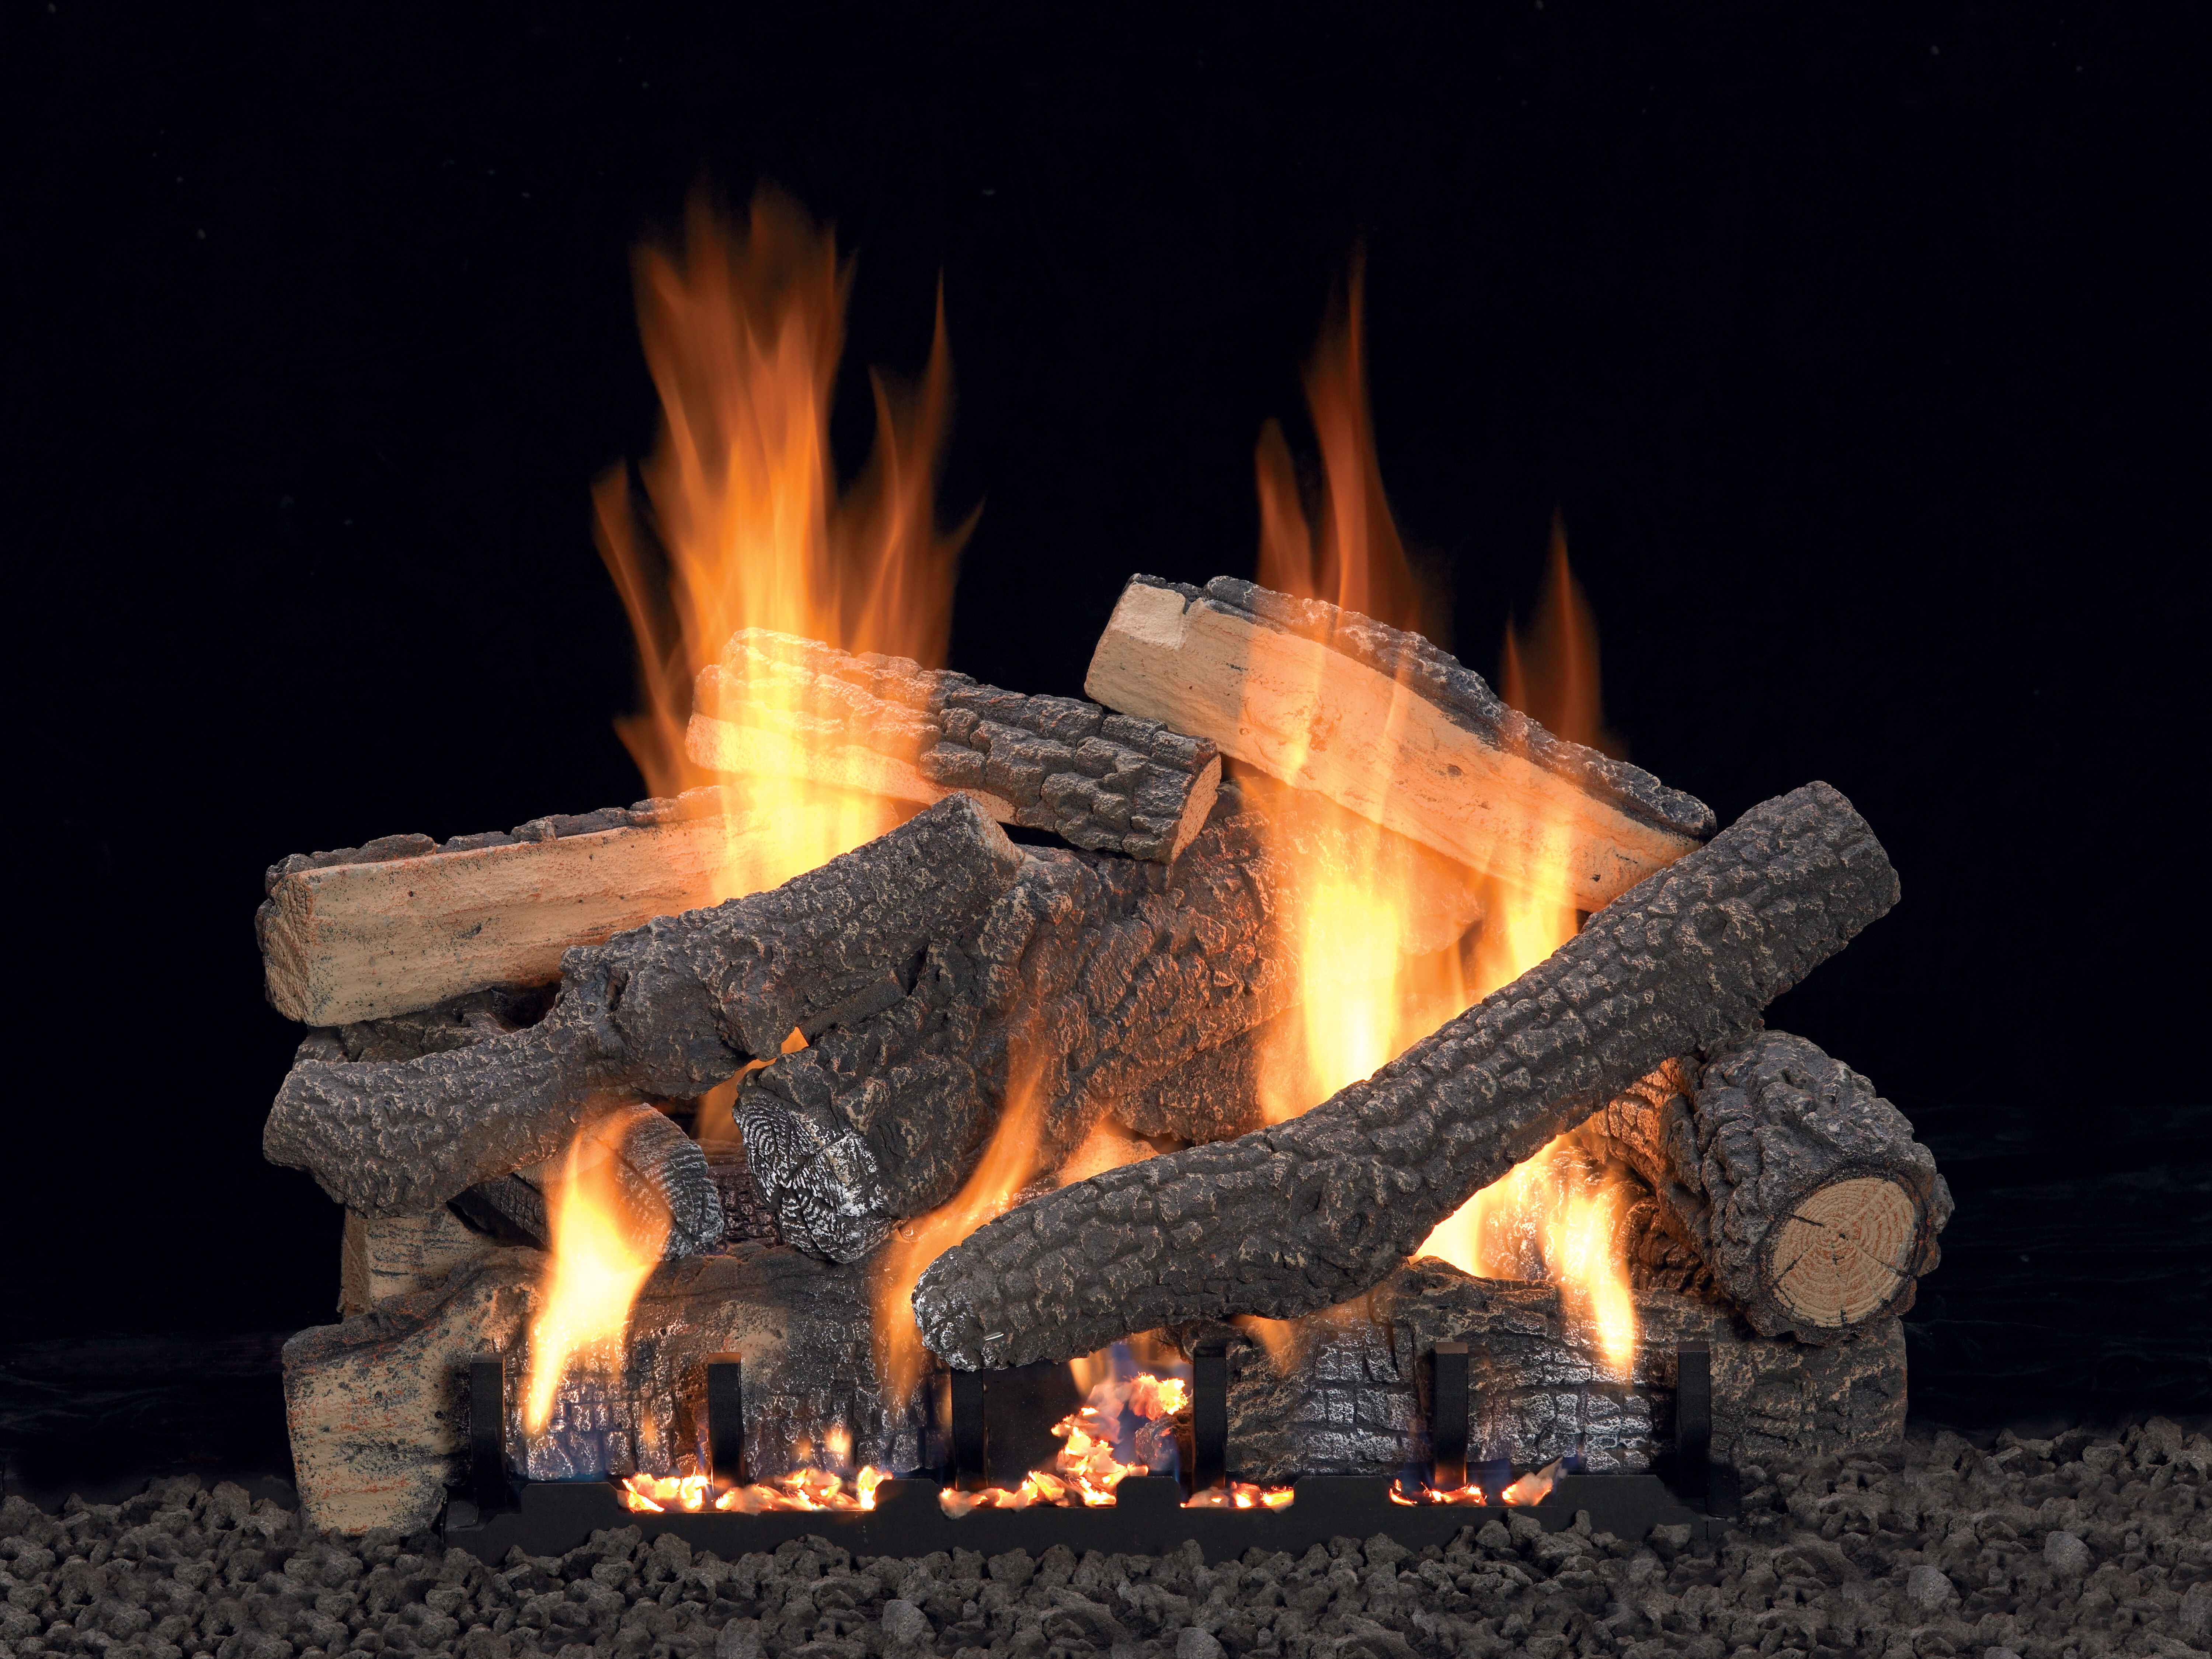 The Ponderosa gas log set by Empire features a hand-painted finish with unique twists, knobs, and cracks, along with split pieces to look like freshly cut firewood. 